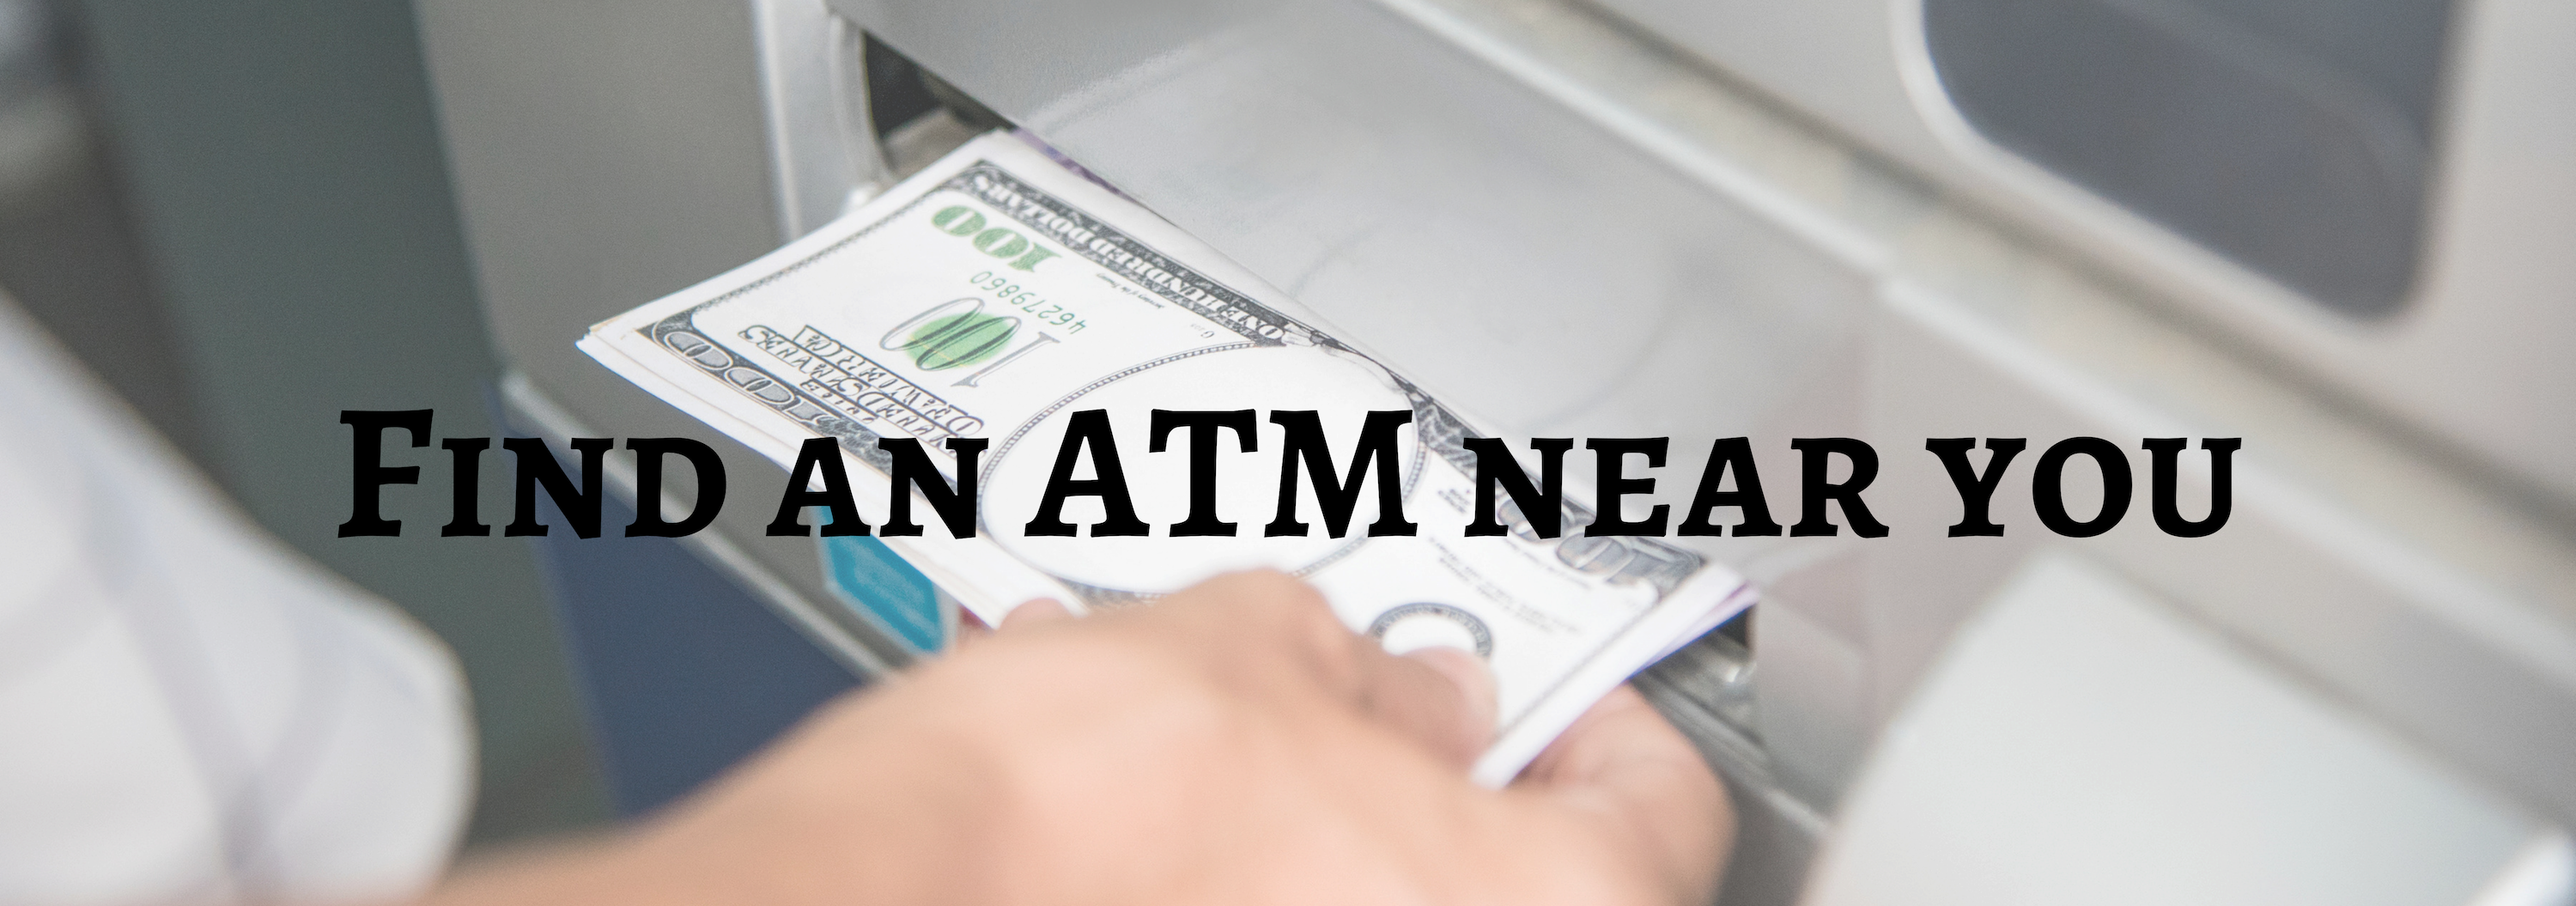 Find An ATM Near You